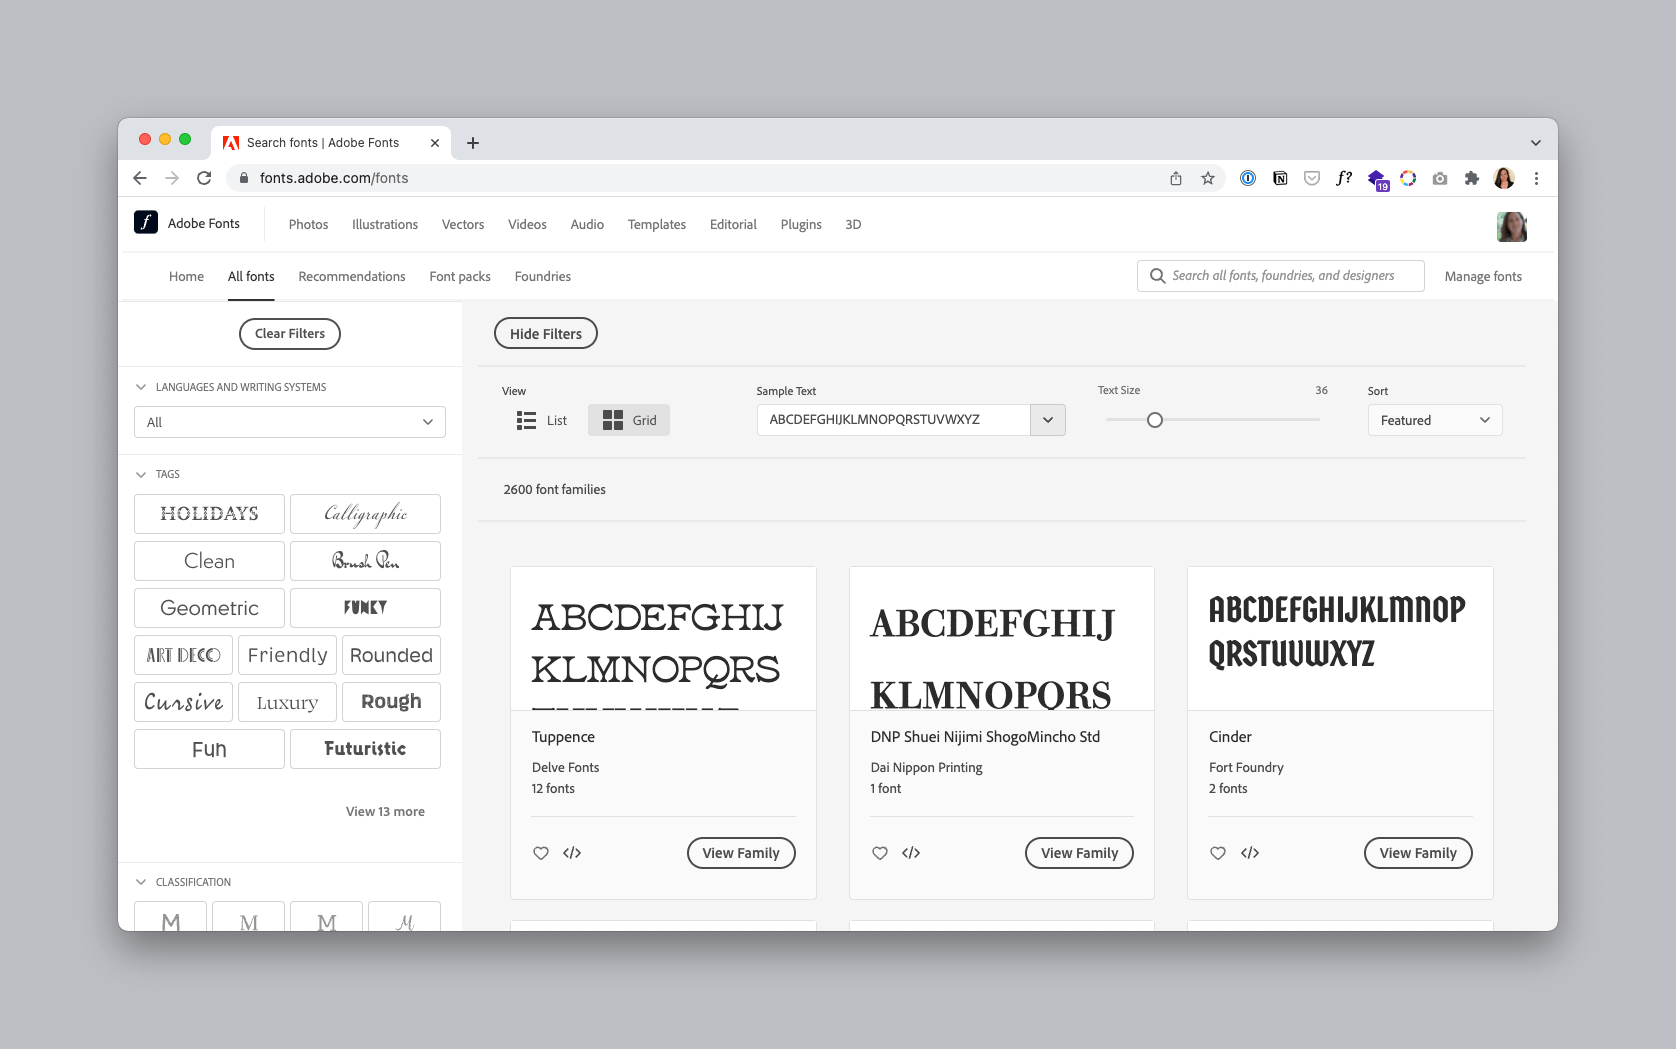 The font collection allows you to narrow your search by describing the font type, like Geometric, or Rounded.